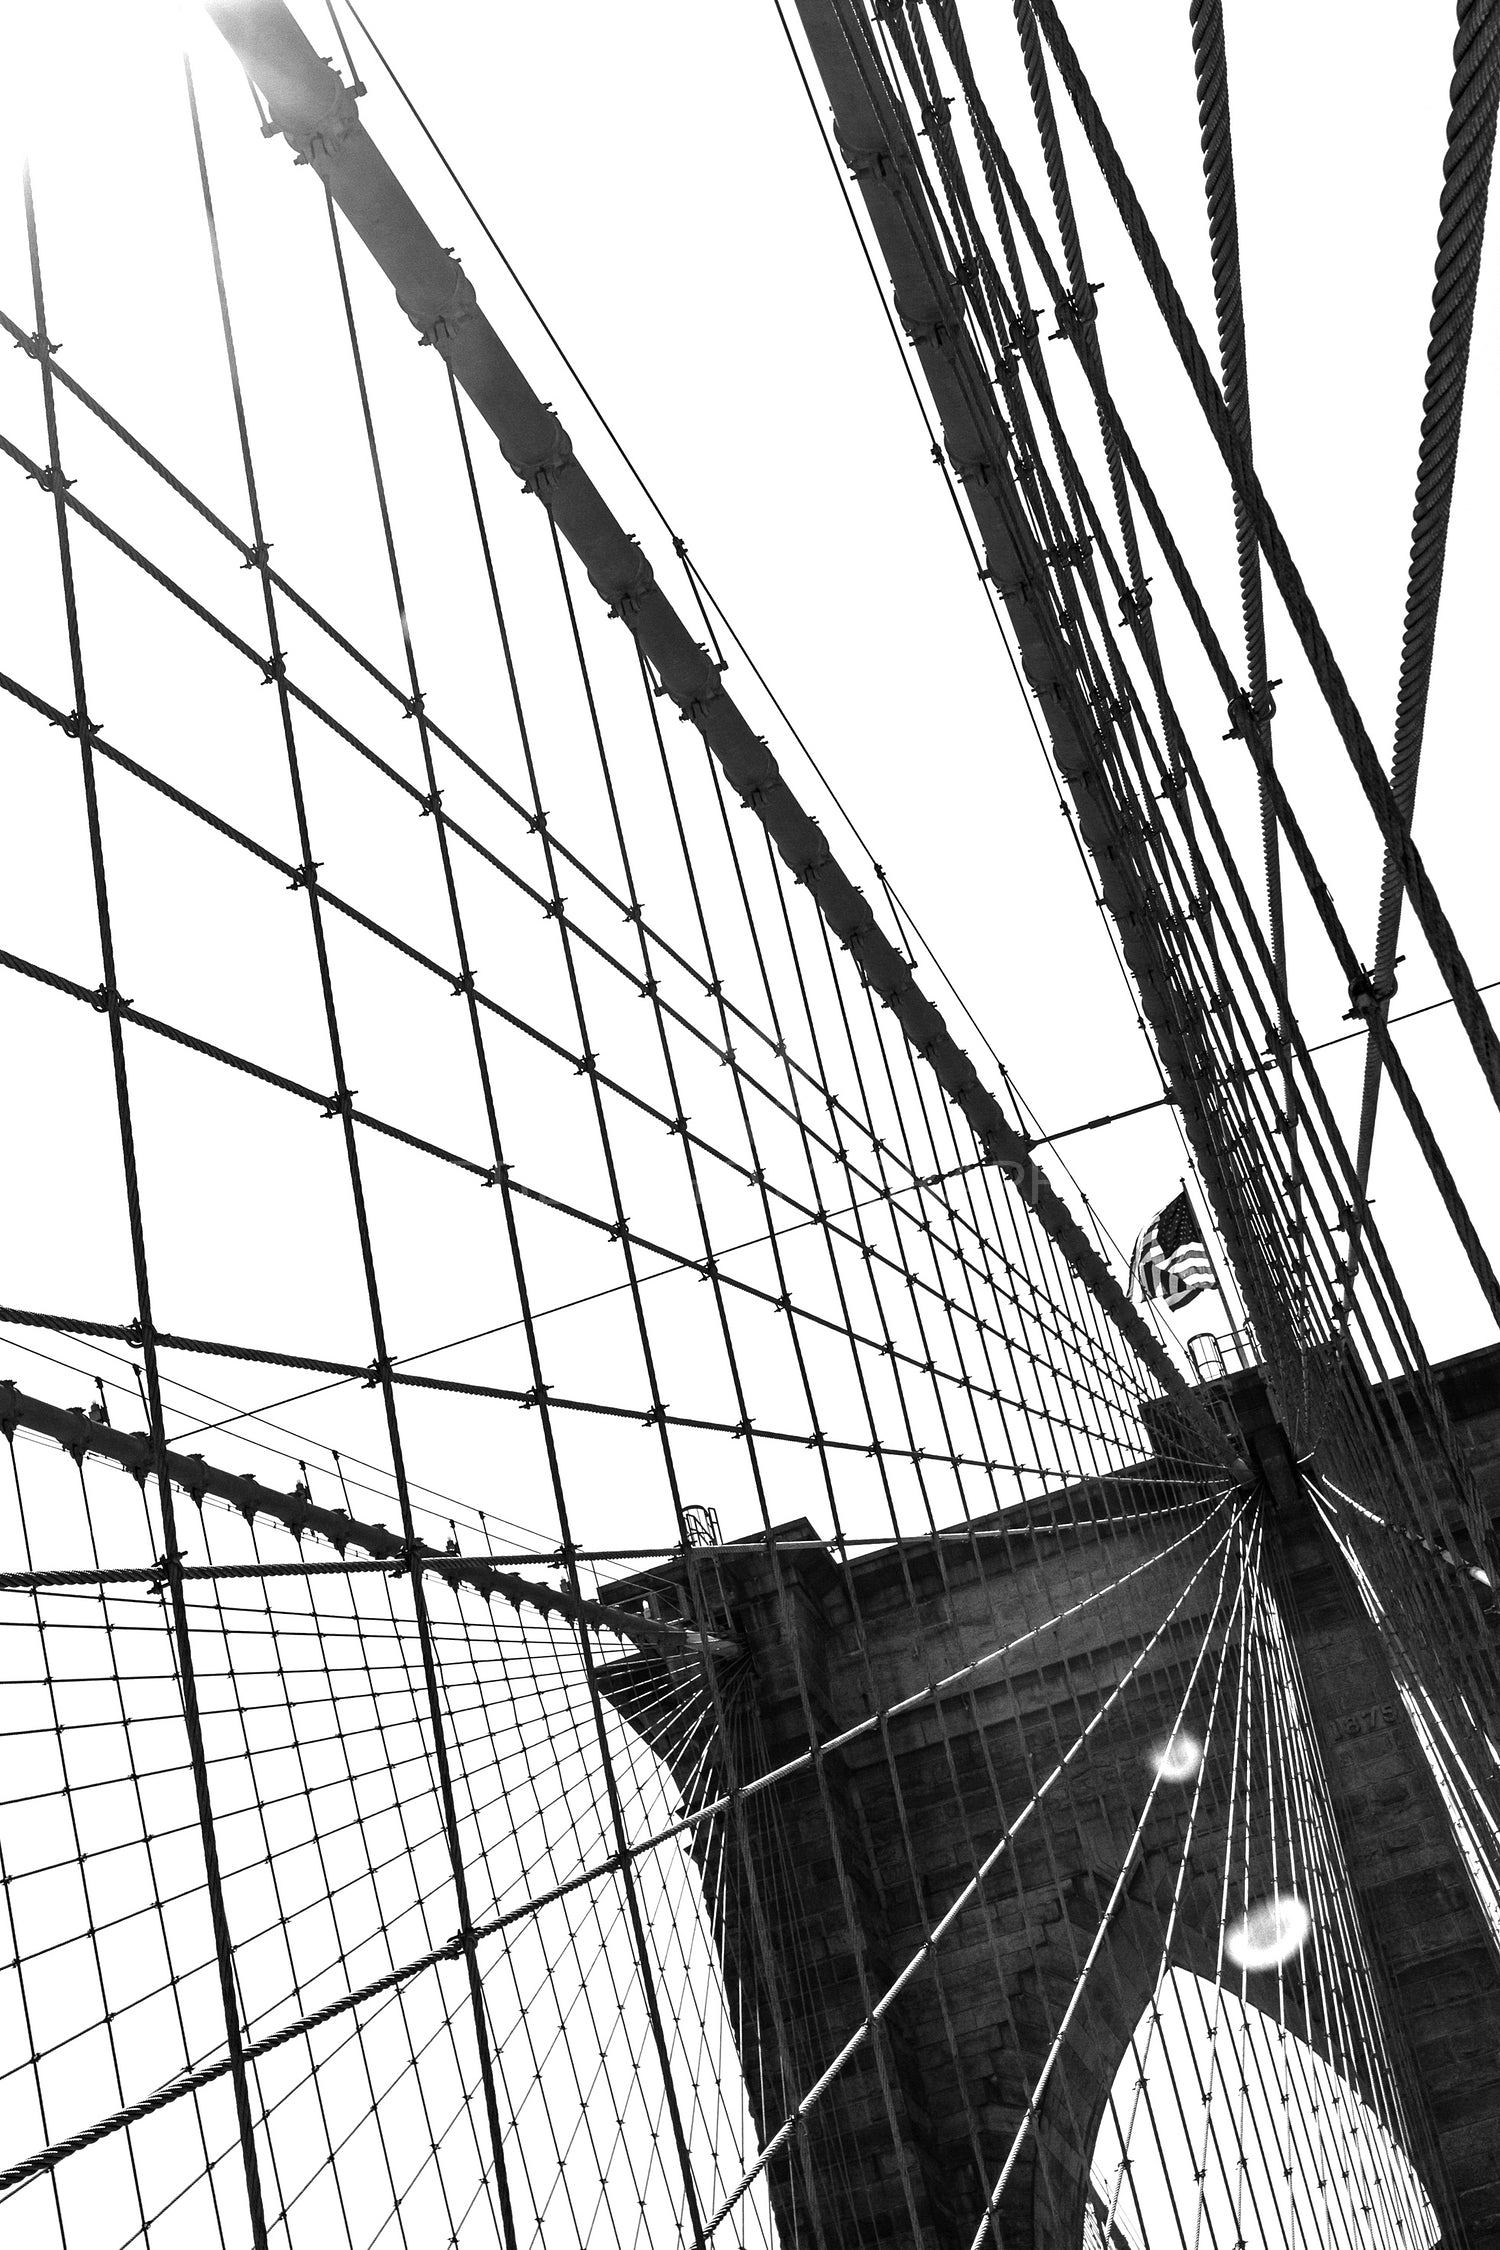 Details of the brooklyn bridge and the sun in black and white